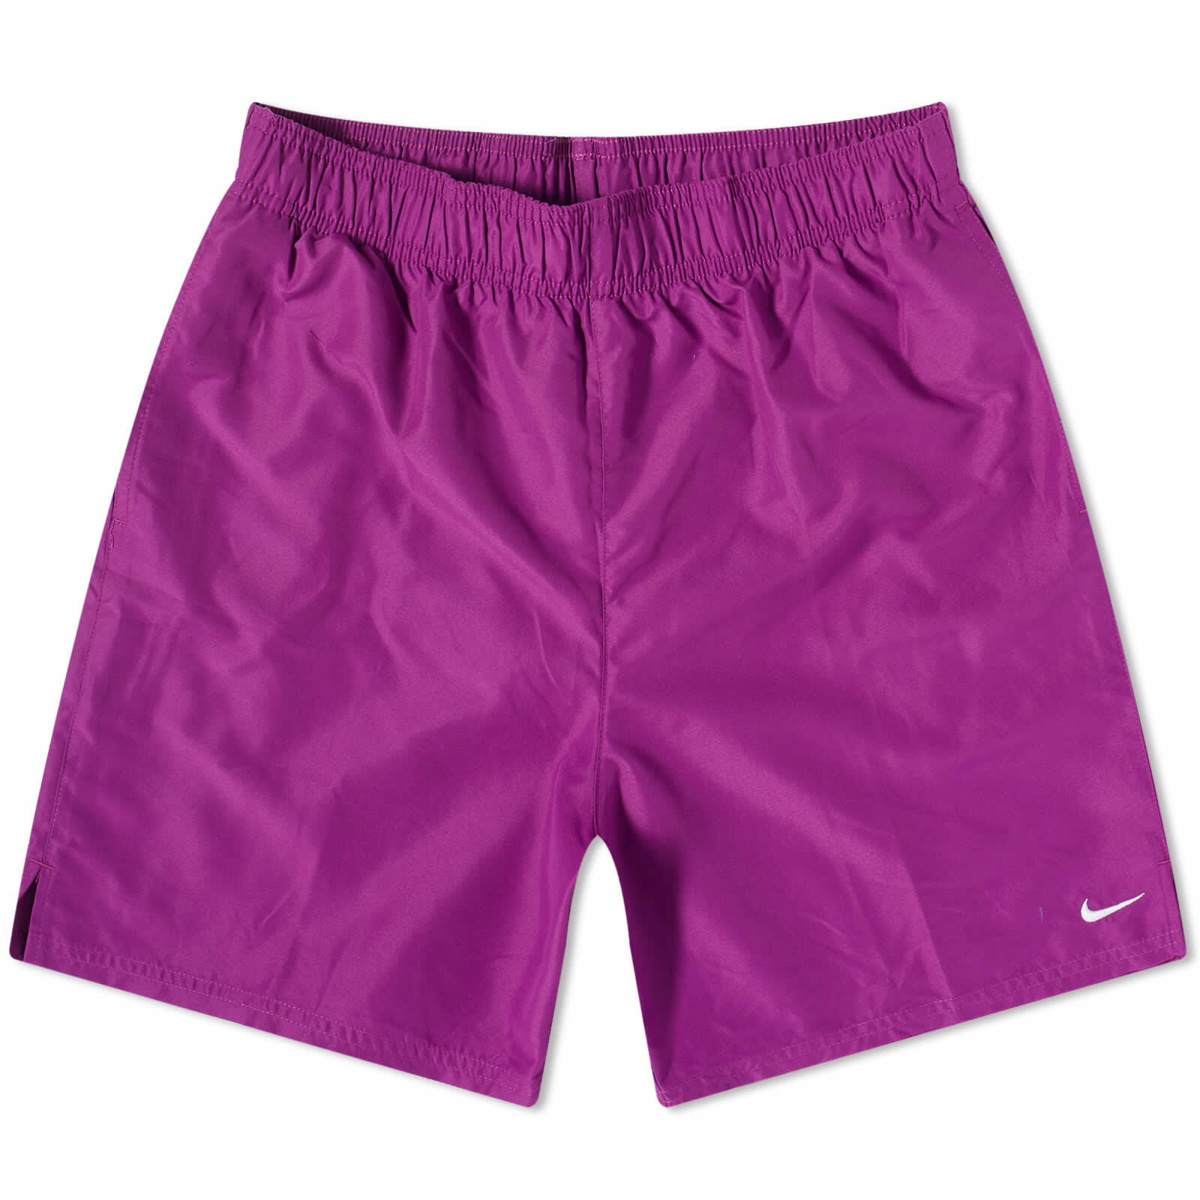 Nike Swimming essential 7 inch volley shorts in orange